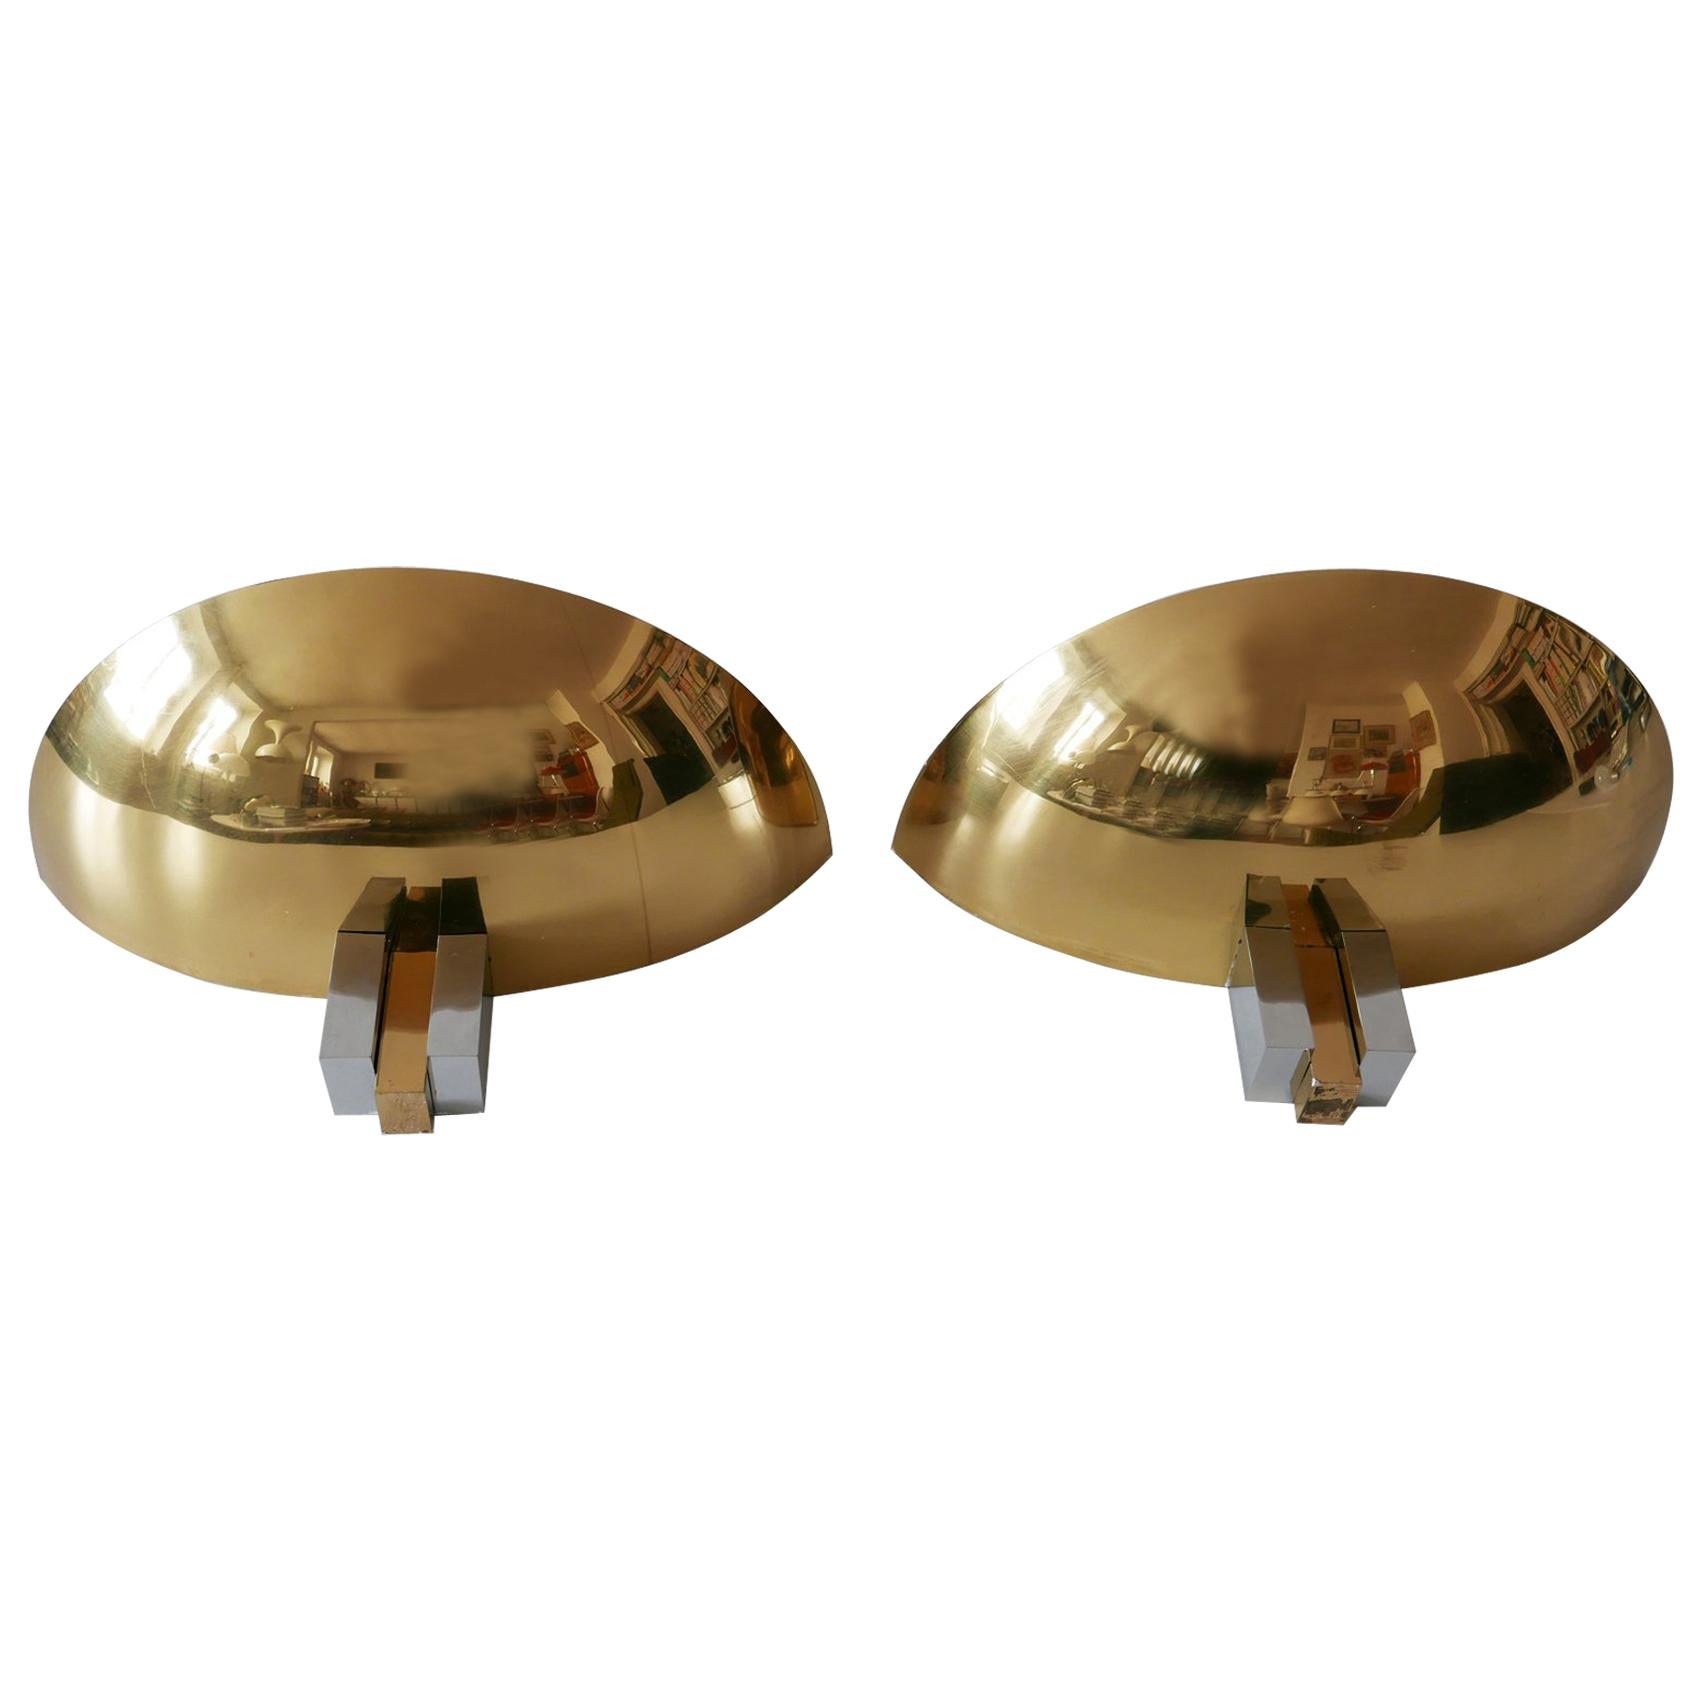 Set of Two Midcentury Brass Wall Lamps or Sconces by Art-Line, 1980s, Germany For Sale